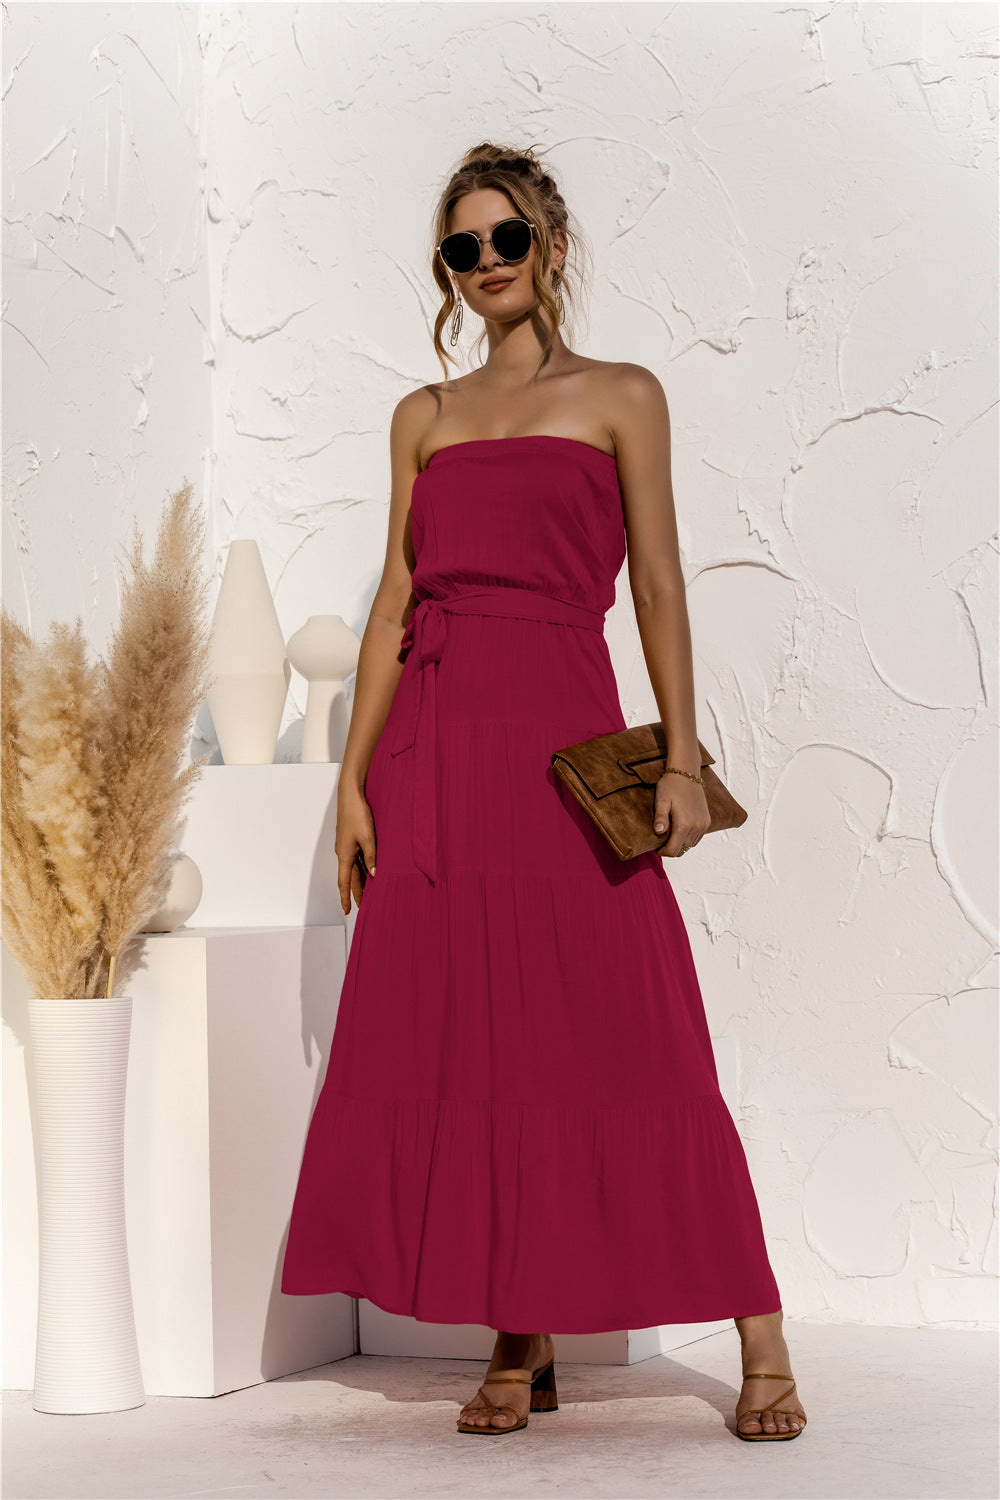 Don’t Mind Me Strapless Maxi Dress - red strapless maxi dress with top overlay, and tie waist. #Firefly Lane Boutique1